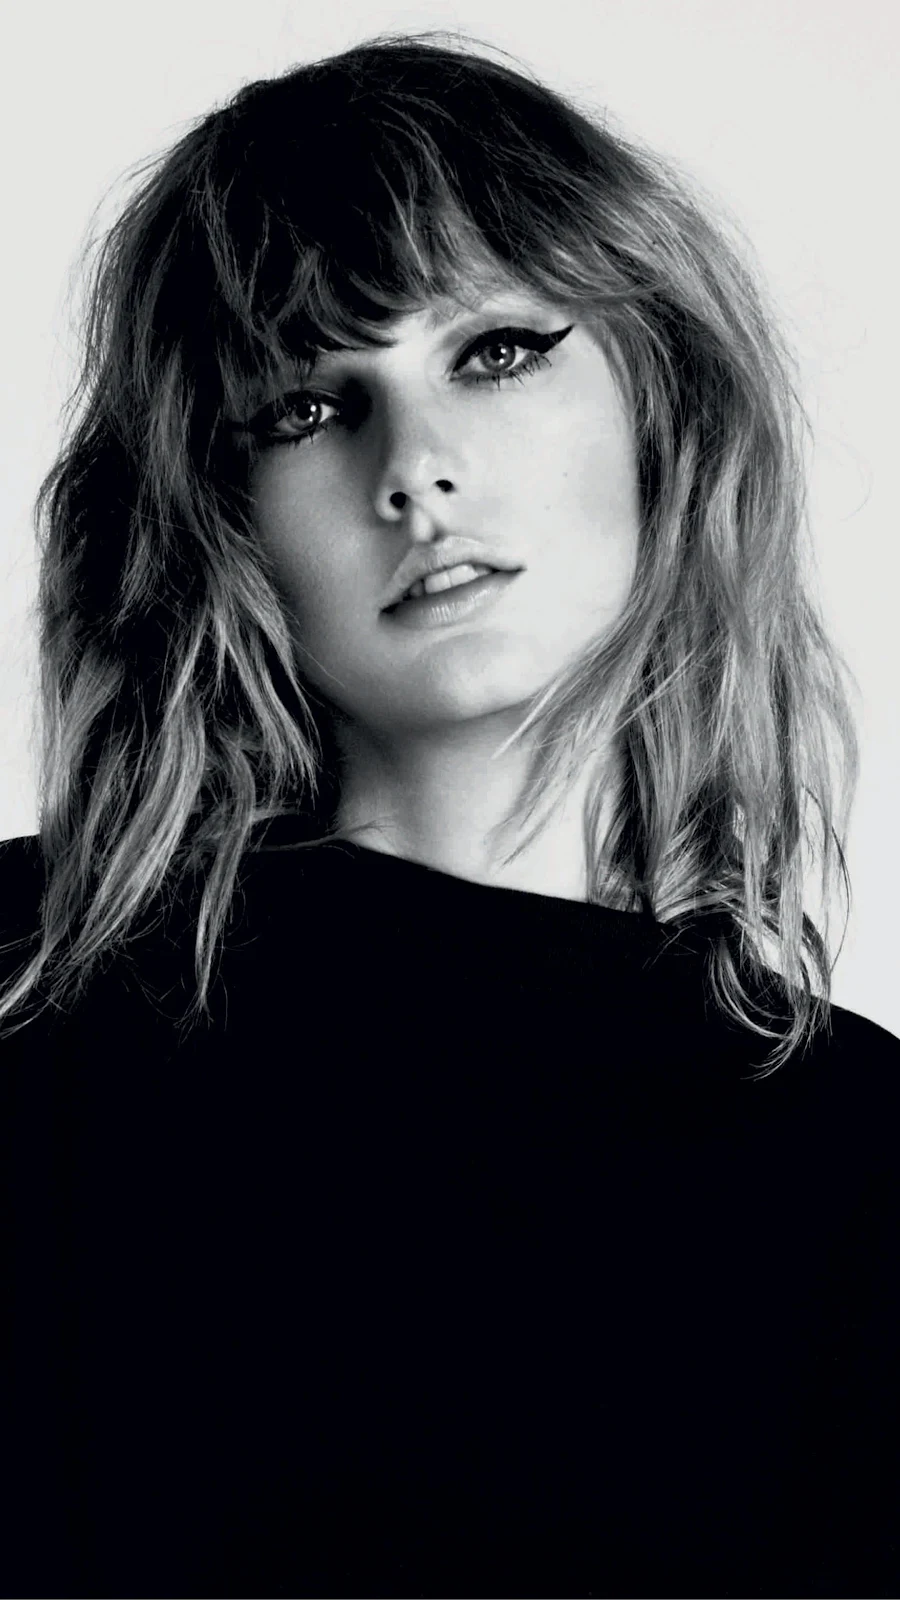 Taylor Swift Monochrome 4K iPhone Wallpaper Background [2160x3840] Free Download